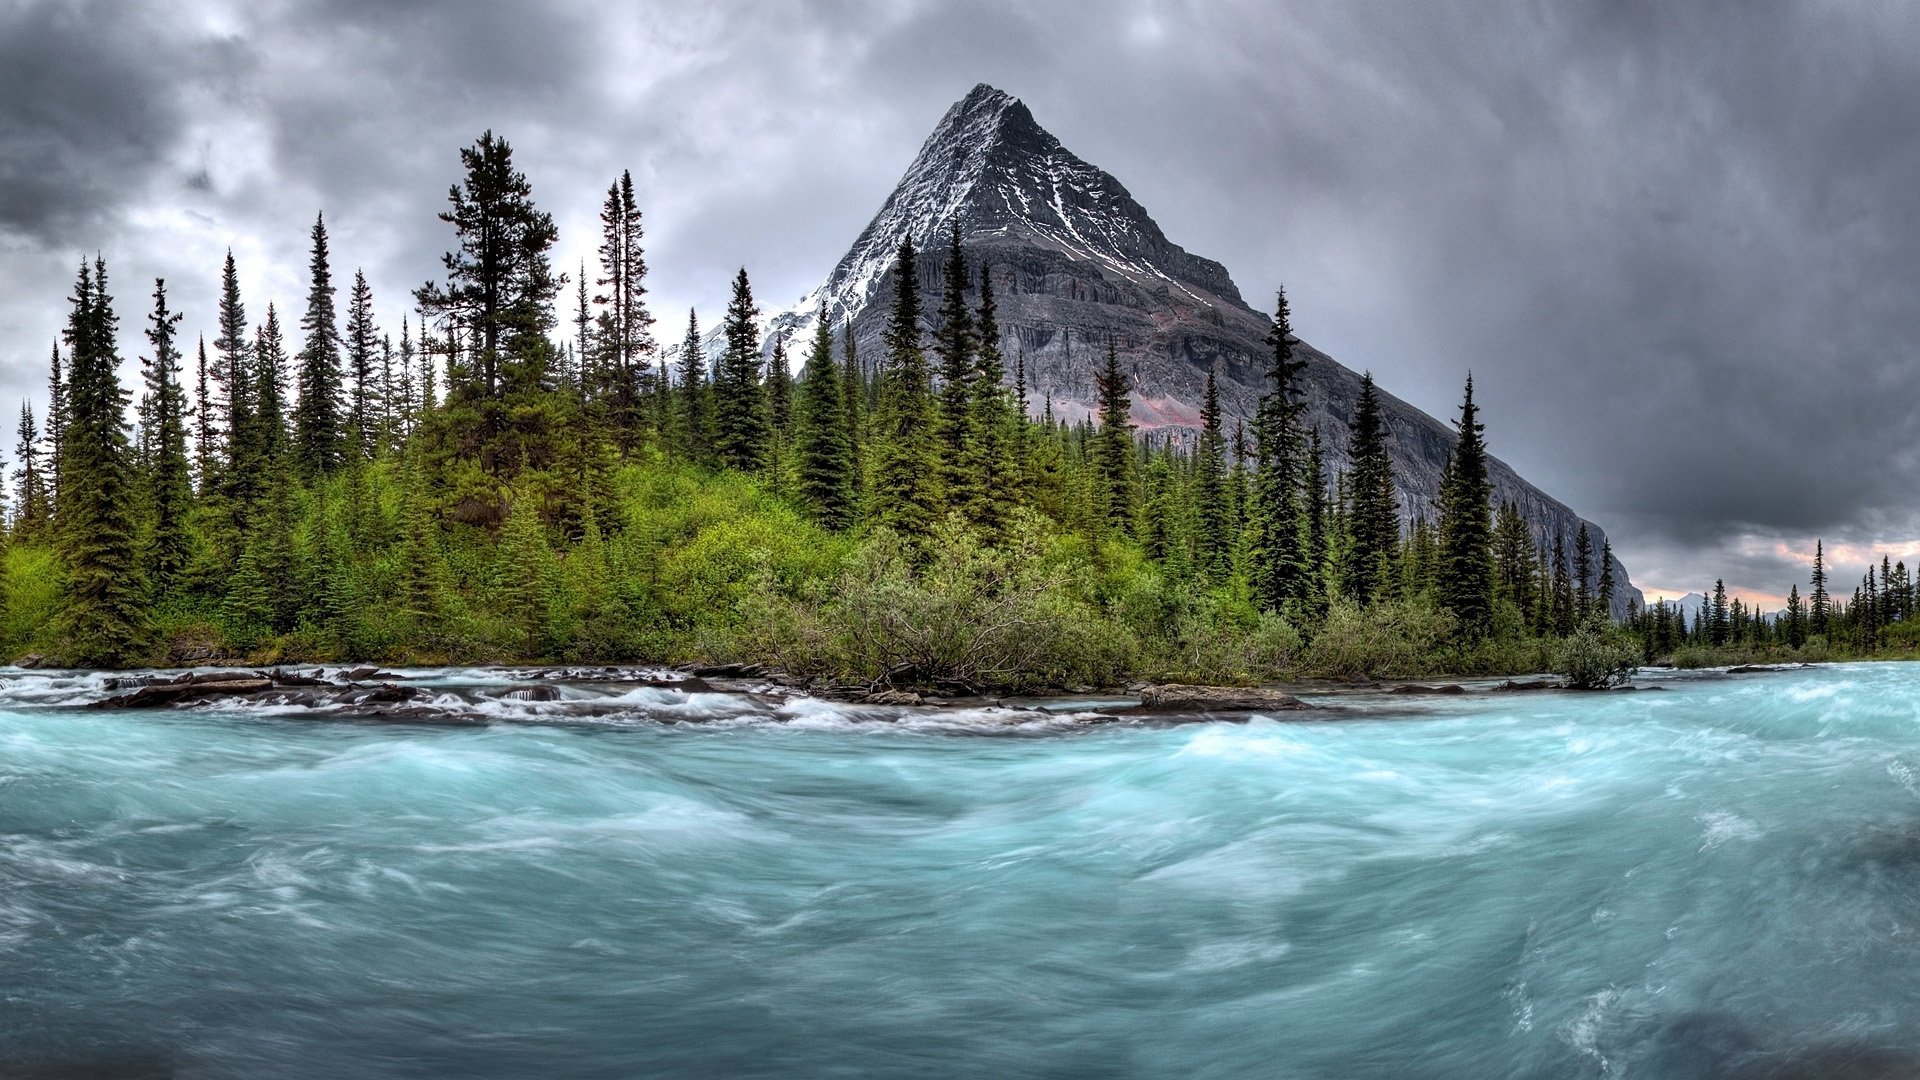 landscapes, Rapids, Timelapse, Trees, Forest, Woods, Shore, Bank, Mountains, Sky, Clouds Wallpaper